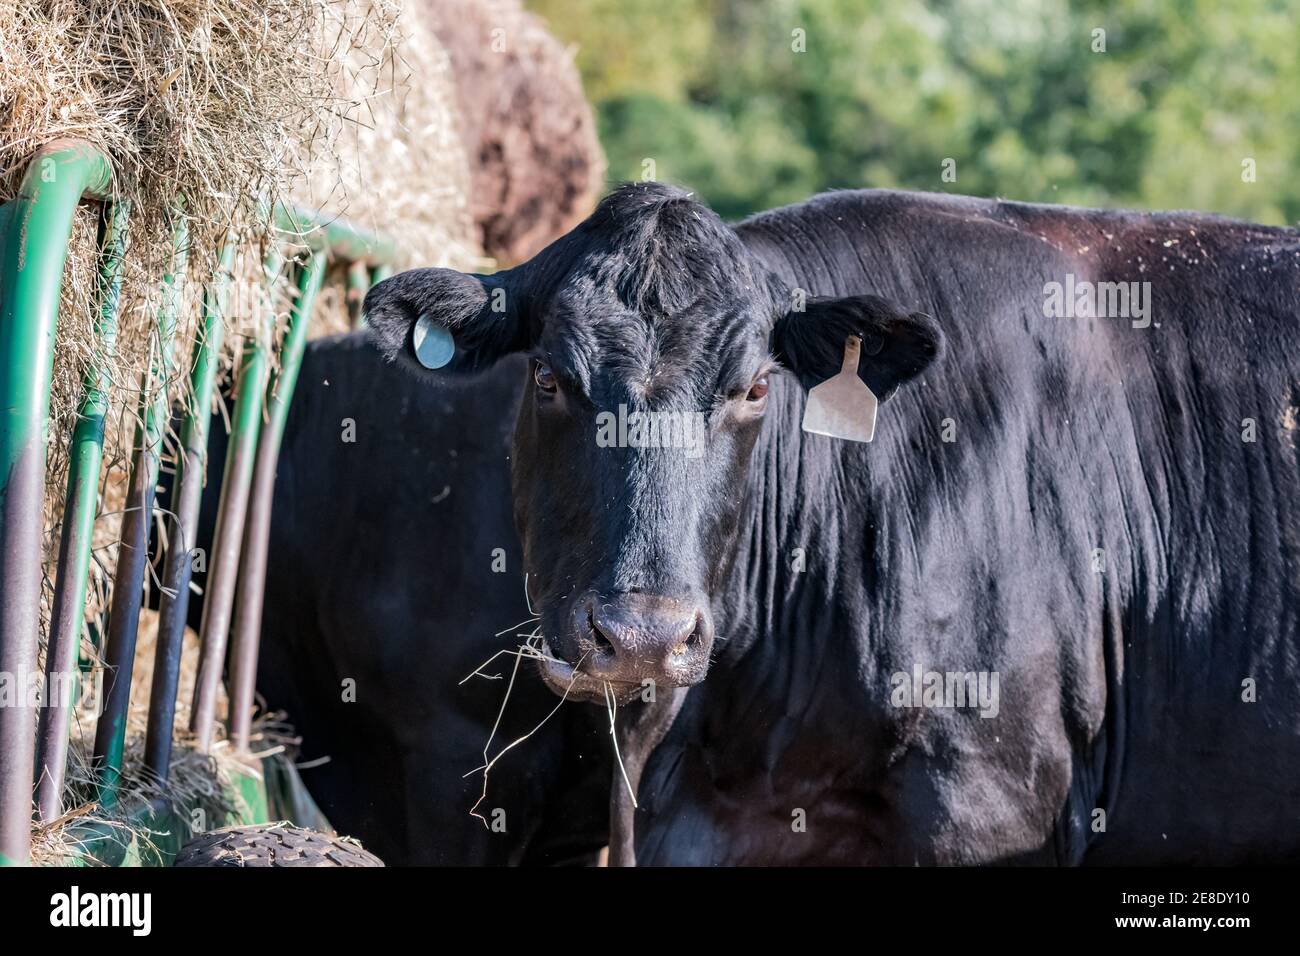 Black Angus cow looking at the camera while standing next to a hay feeder Stock Photo